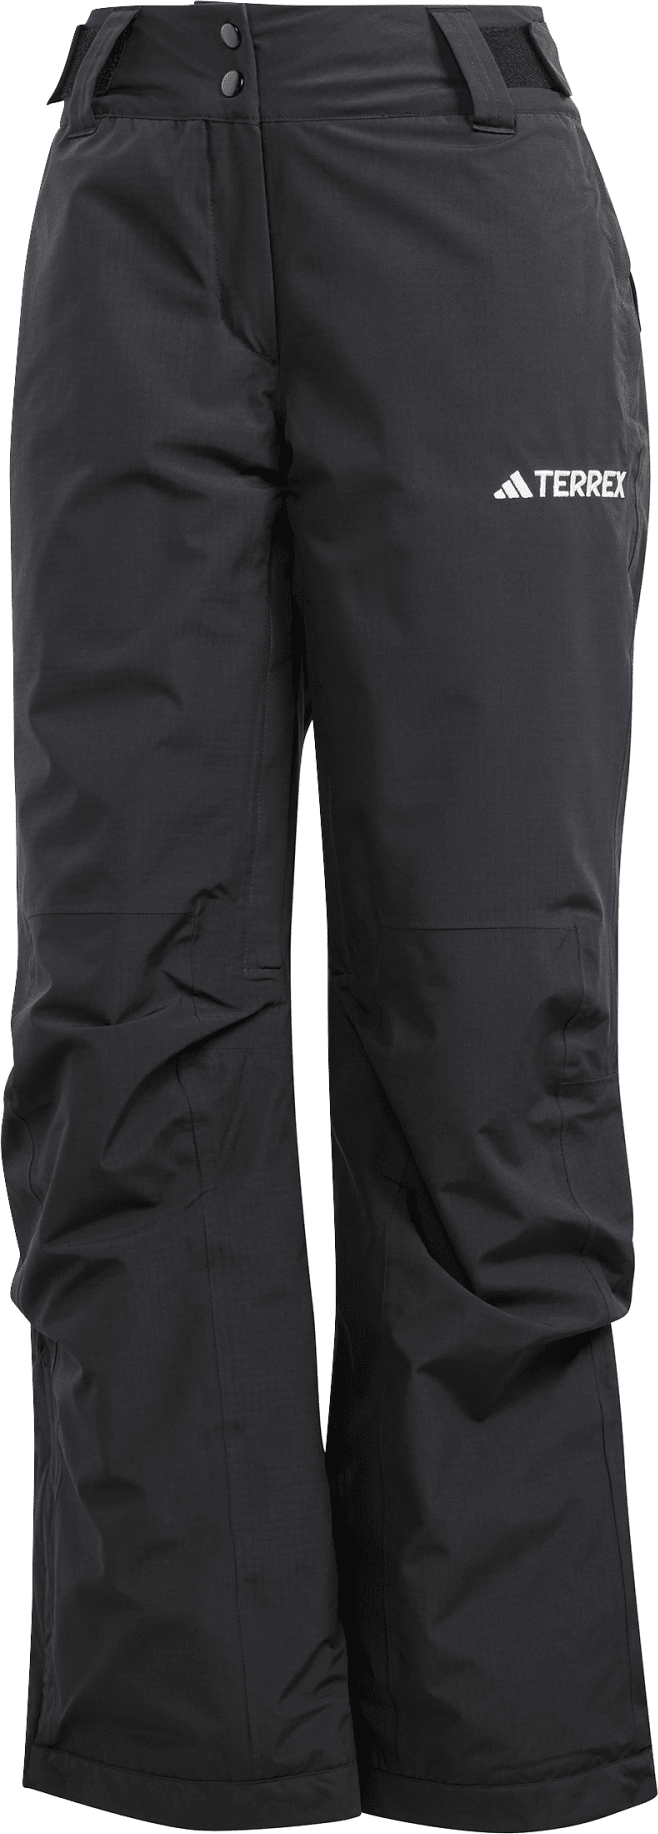 Women’s Terrex Xperior 2L Insulated Tracksuit Bottoms Black